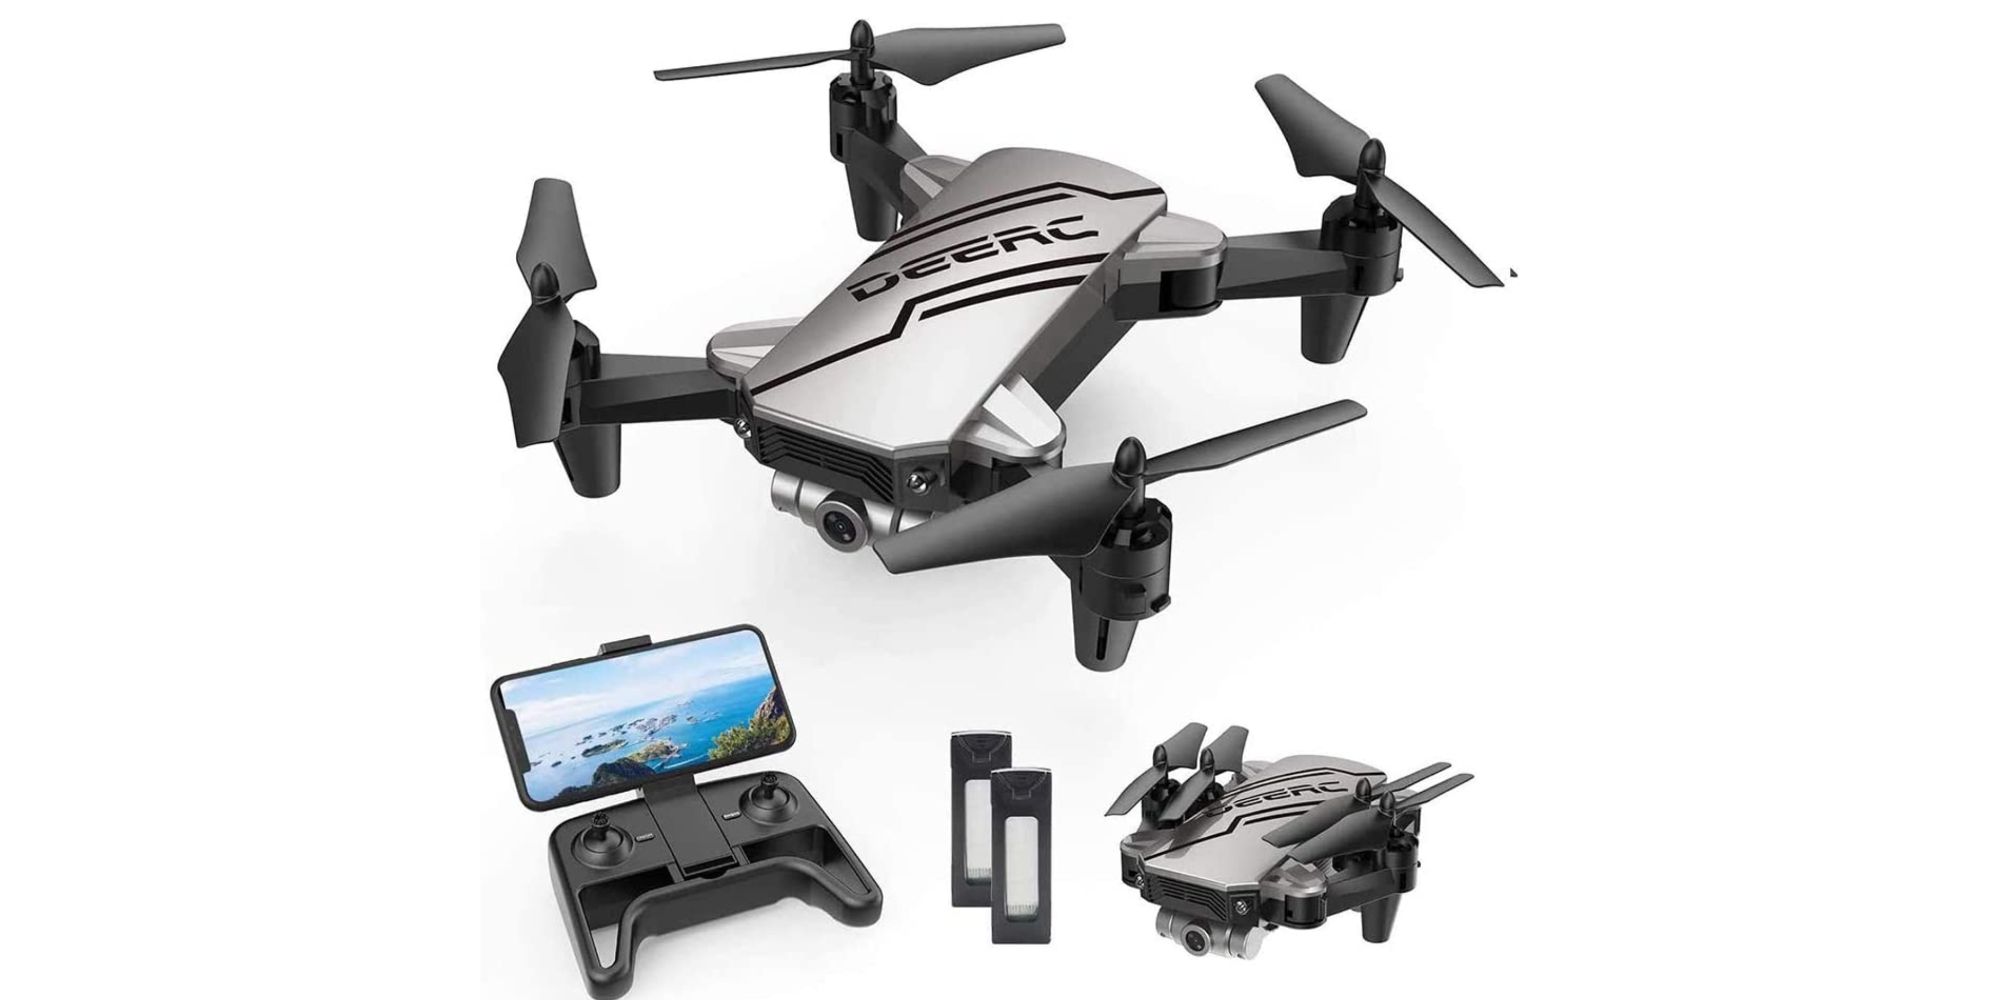 Deerc Drone Set from Amazon